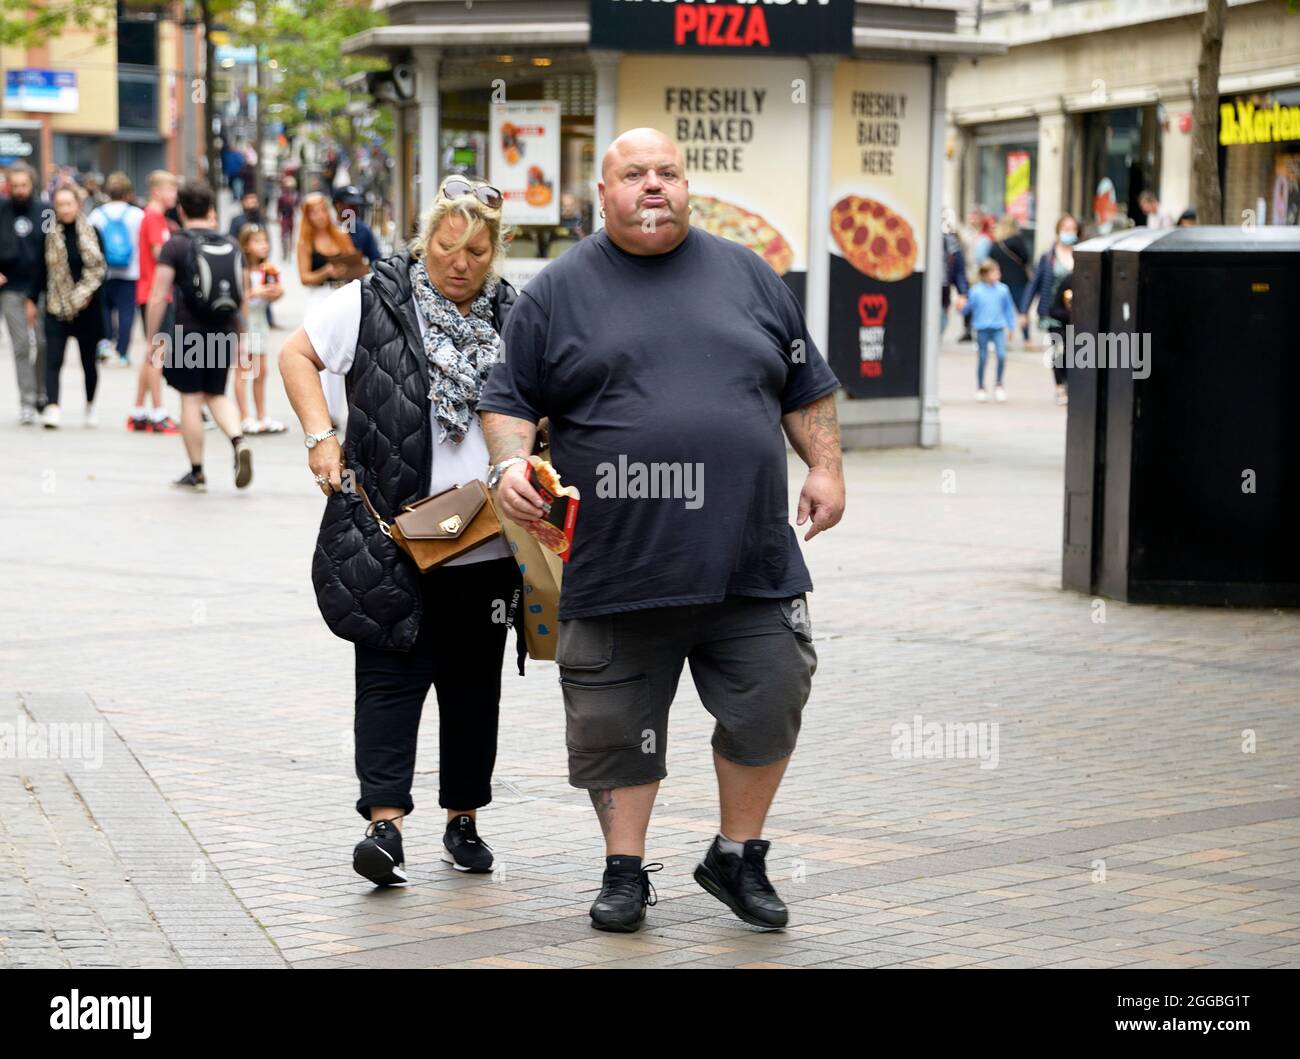 Very obese man, eating pizza in the street Stock Photo